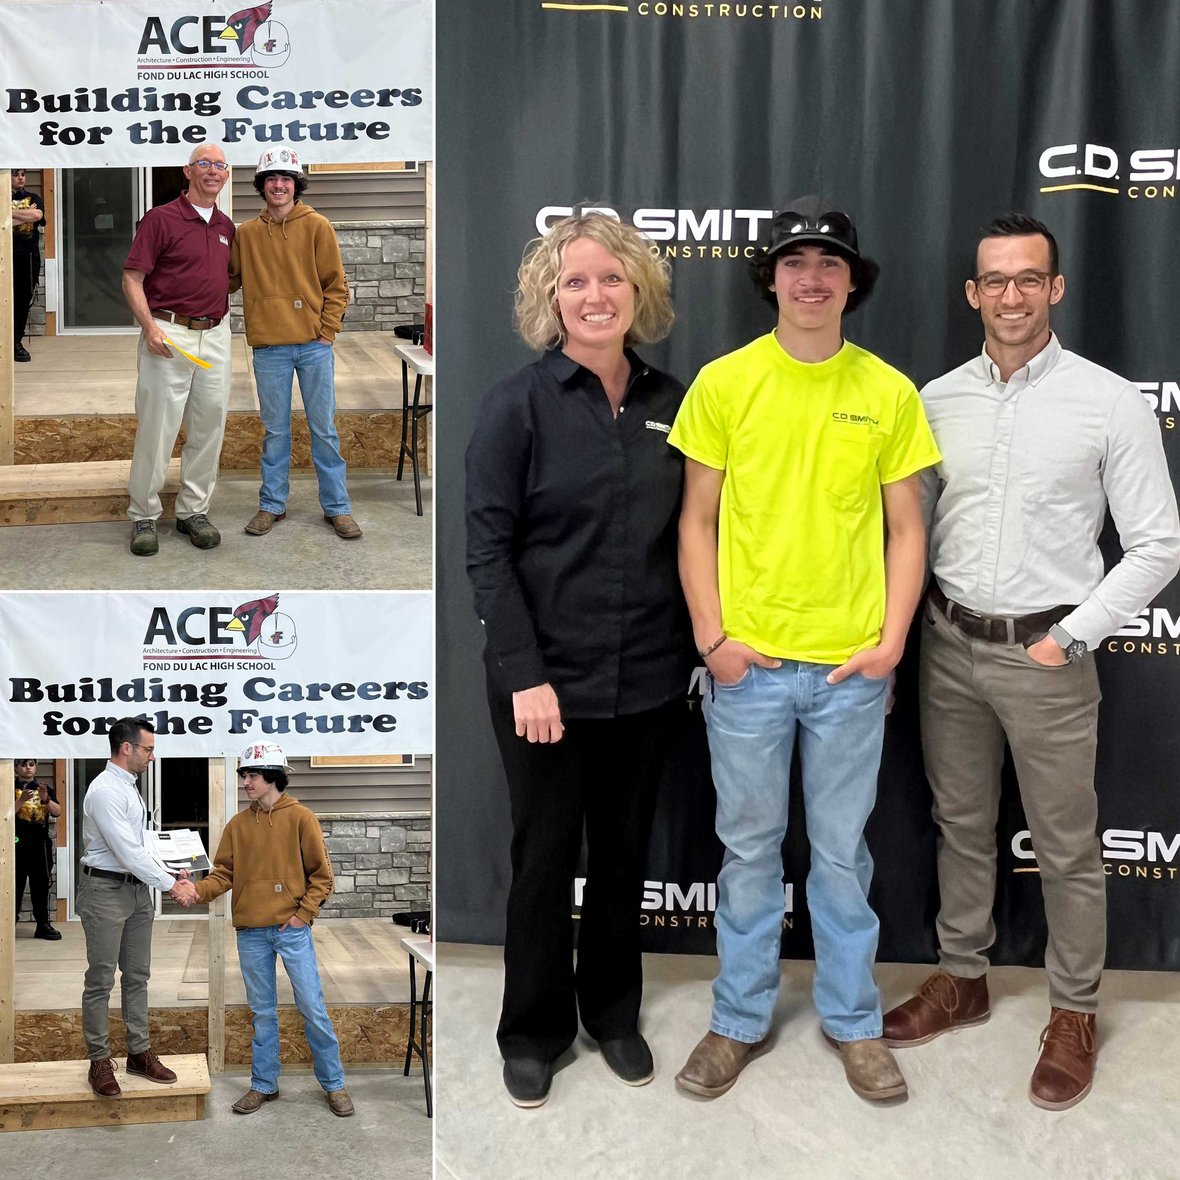 CD Smith Construction at Fond du Lac High School ACE Academy Apprentice Signing Day with Jacob Halper Skilled Trades Grant Recipient